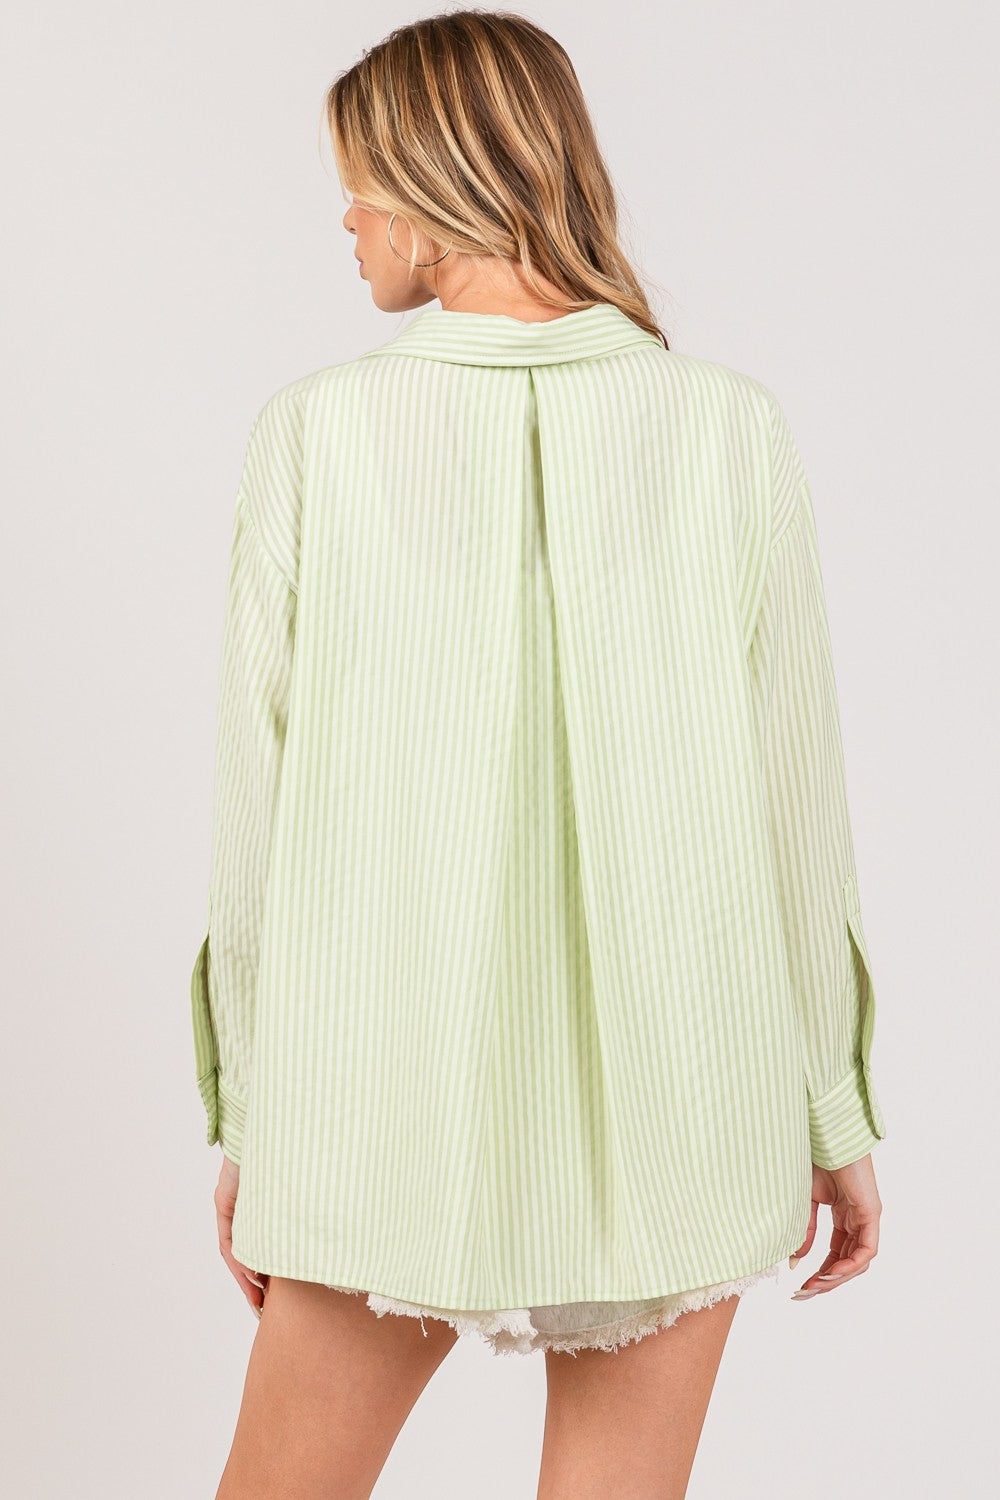 Striped Button Up Long Sleeve Shirt for Women in Sage | Shirts | Ro + Ivy